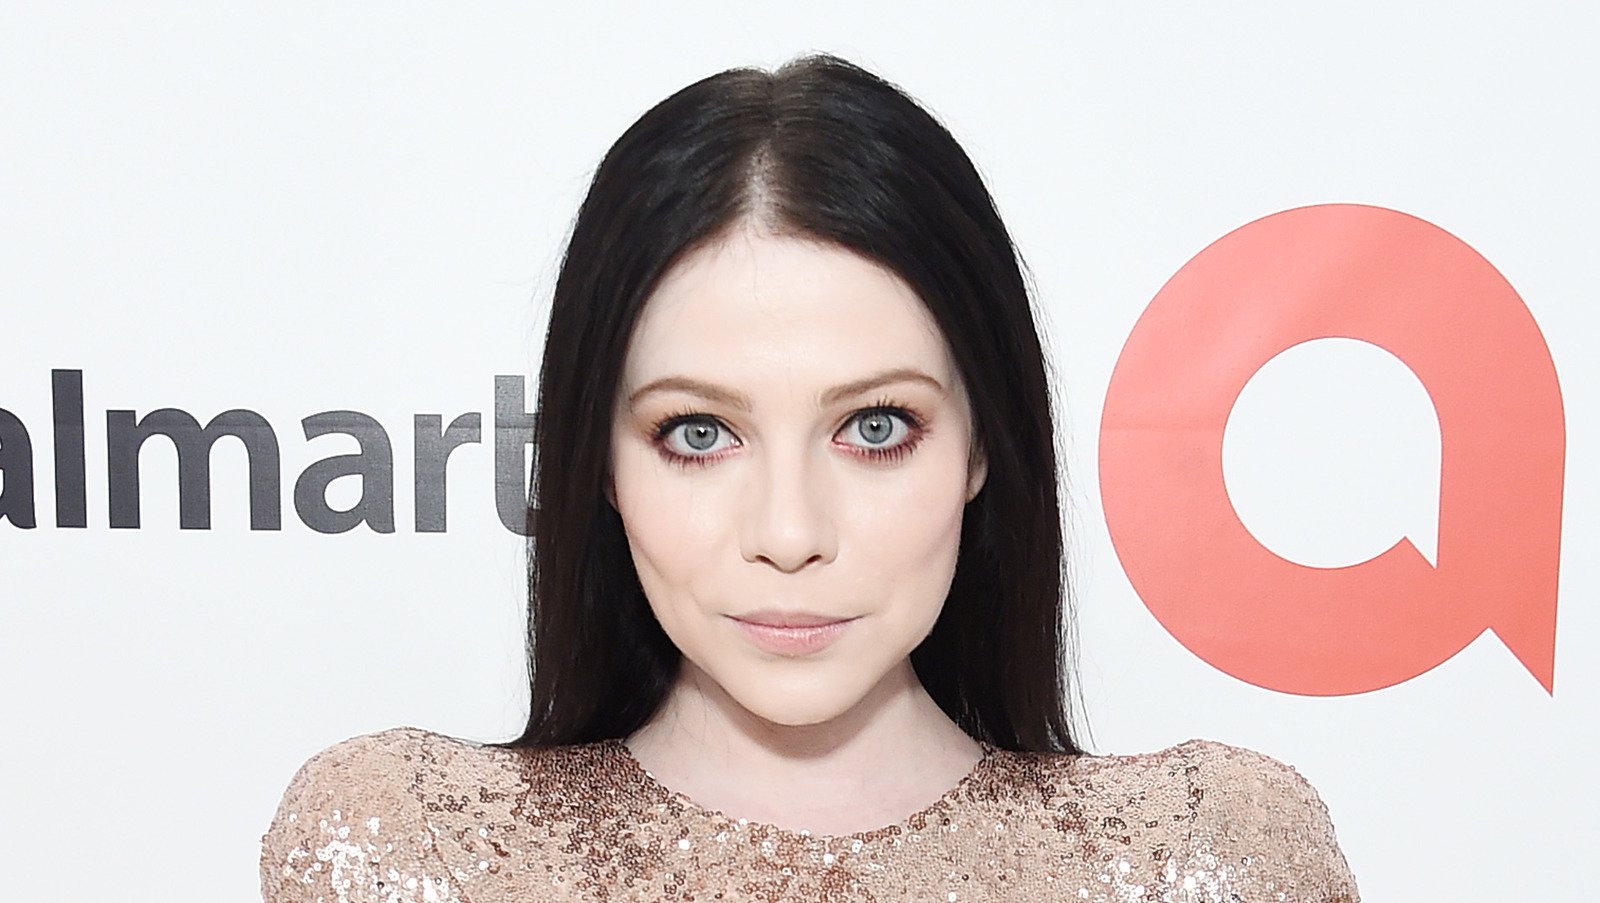 Whatever Happened To Michelle Trachtenberg?